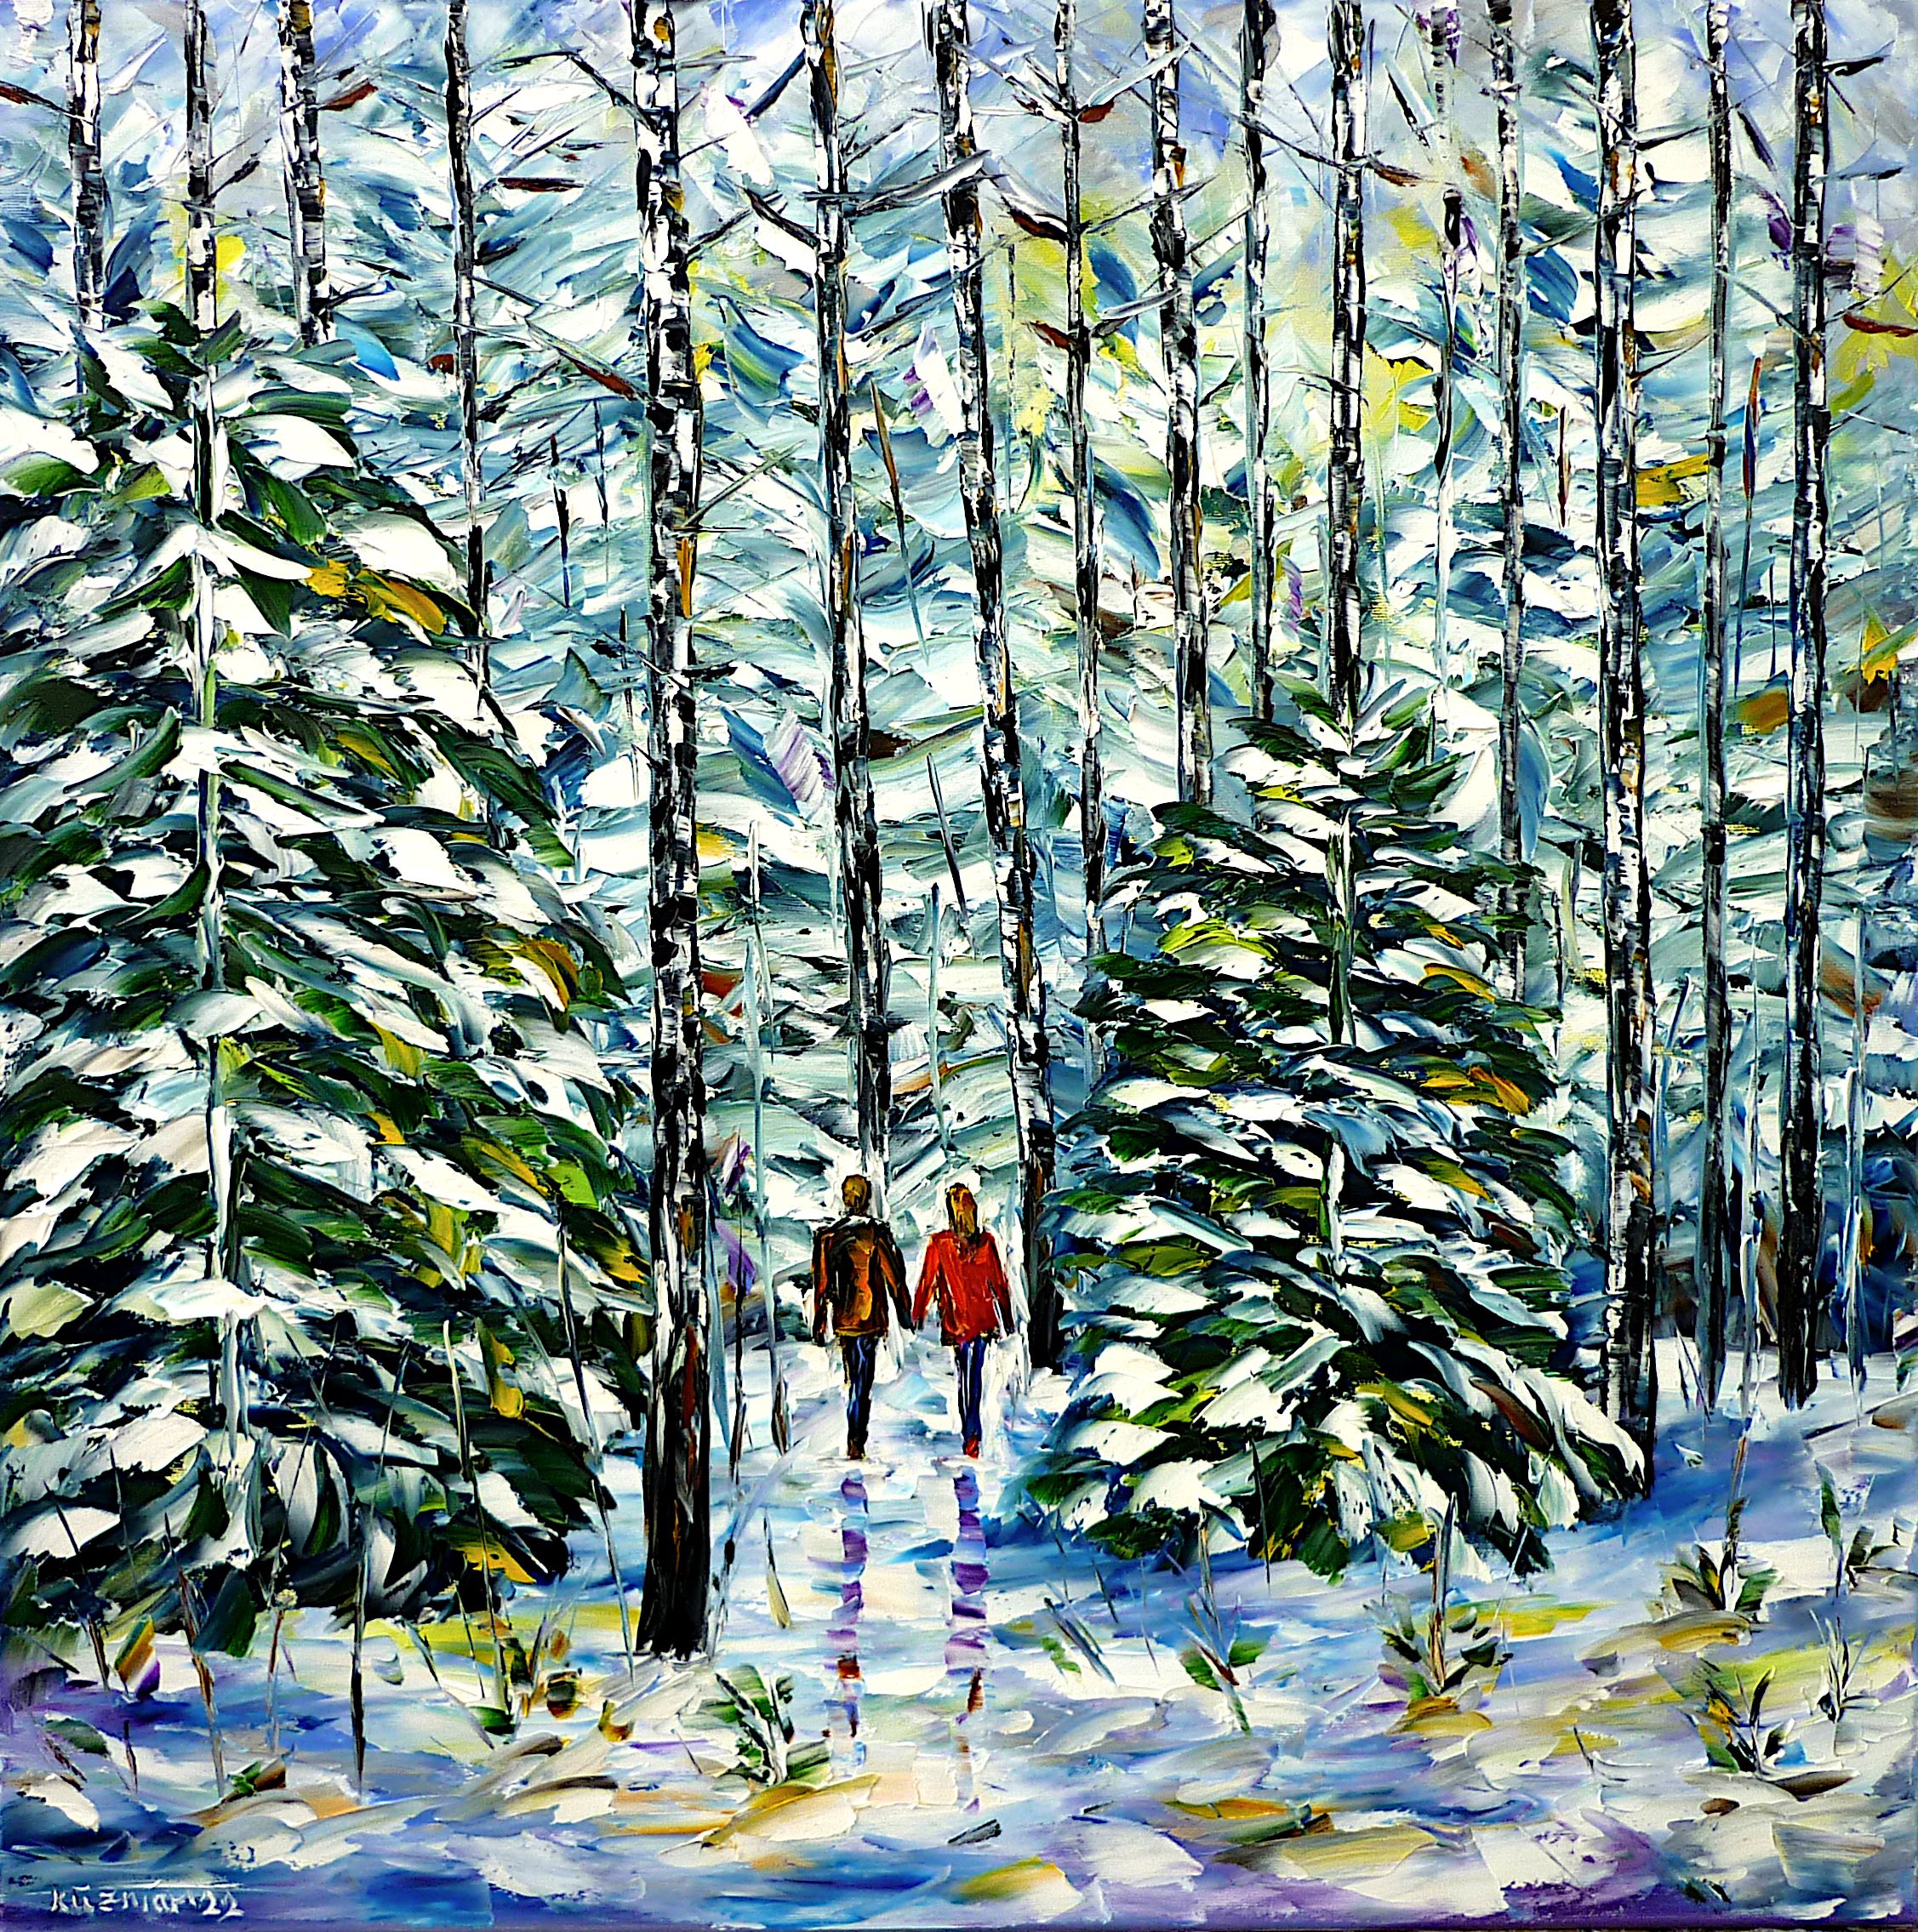 white winter,winter landscape,lovers in winter,love couple in winter,winter walk,forest in winter,snow-covered forest,winter trees,winter birches,snow-covered birches,birch forest,snow-covered firs,romantic scene,love and romance,romantic,people in love,love,holding hands,hand in hand,forest walk,white landscape,Christmas mood,Christmas feelings,winter beauty,winter abstract,forest abstract,snowy landscape,winter and snow,winter impression,winter love,winter romance,winter painting,winter picture,forest landscape,forest painting,forest picture,landscape painting,square format,square picture,square painting,palette knife oil painting,modern art,impressionism,abstract painting,lively colors,colorful painting,bright colors,light reflections,impasto painting,figurative